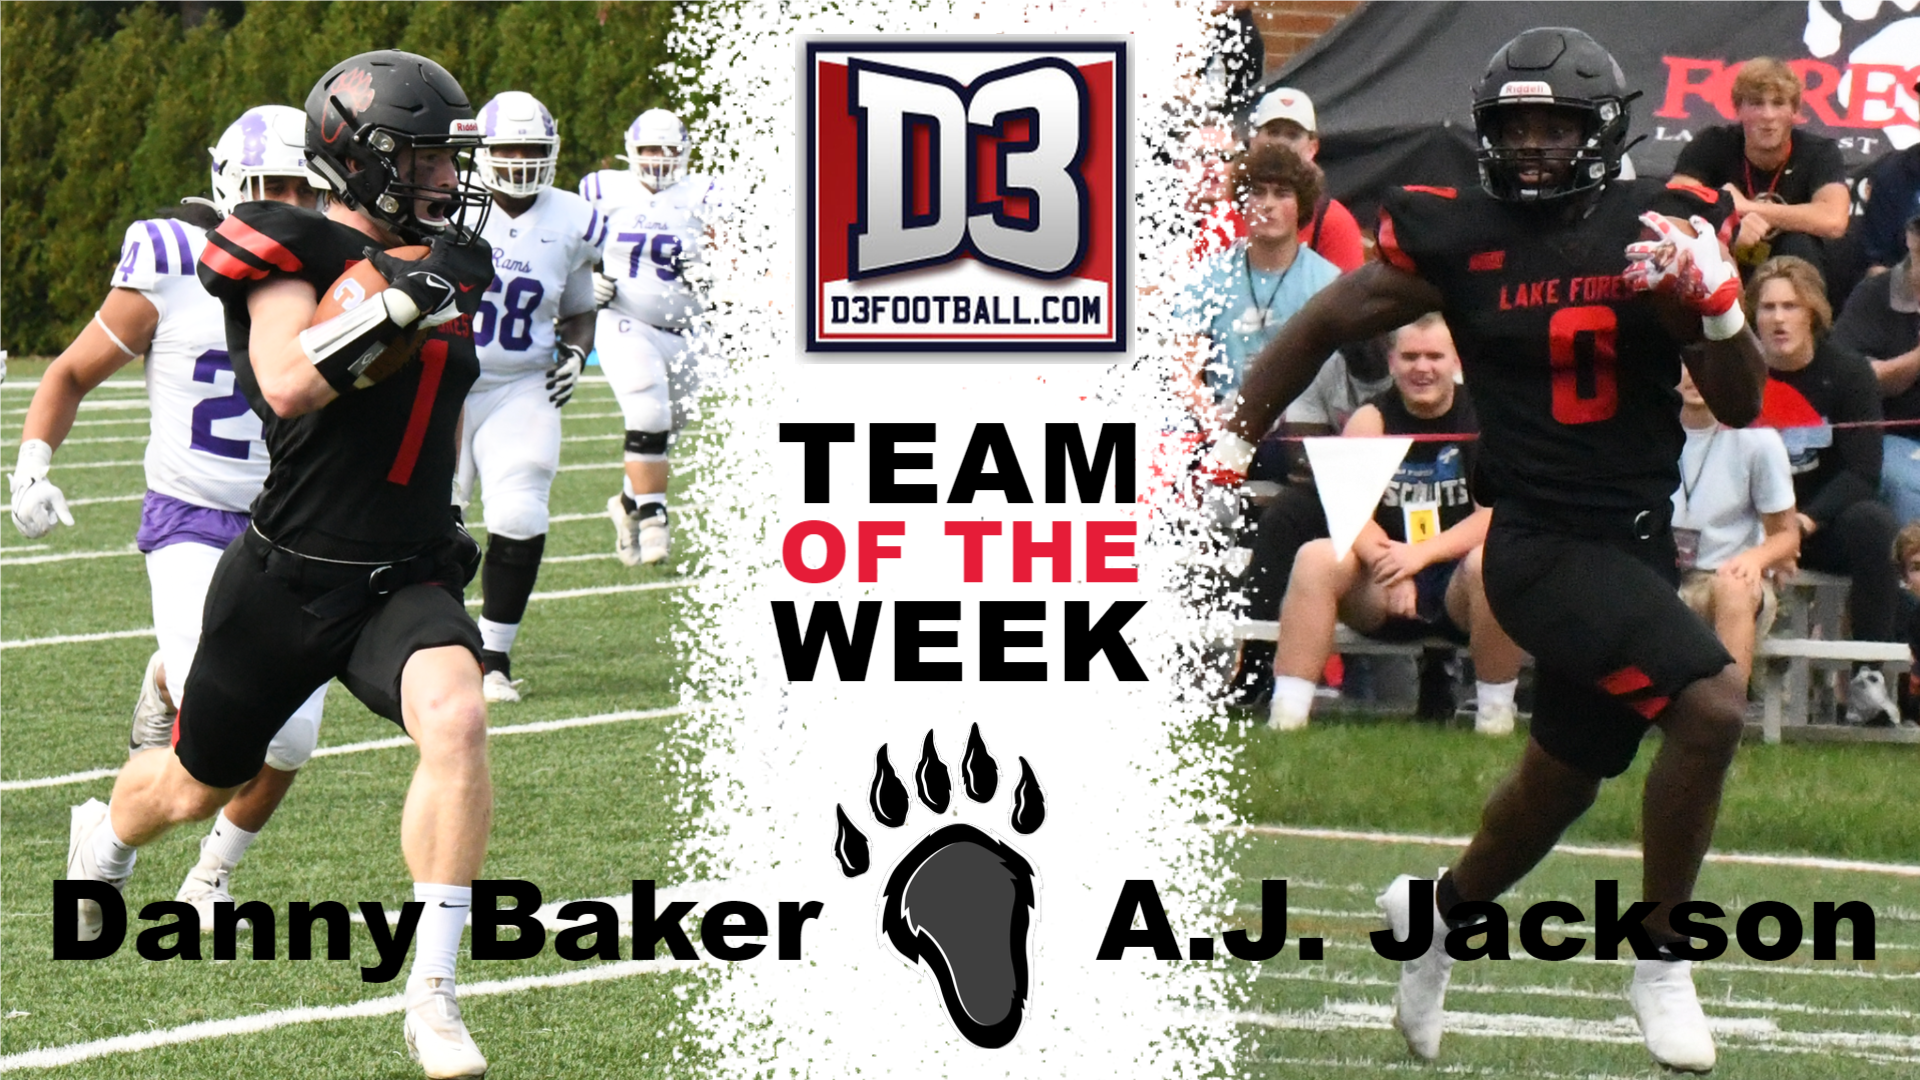 Baker and Jackson Land on D3football.com Team of the Week